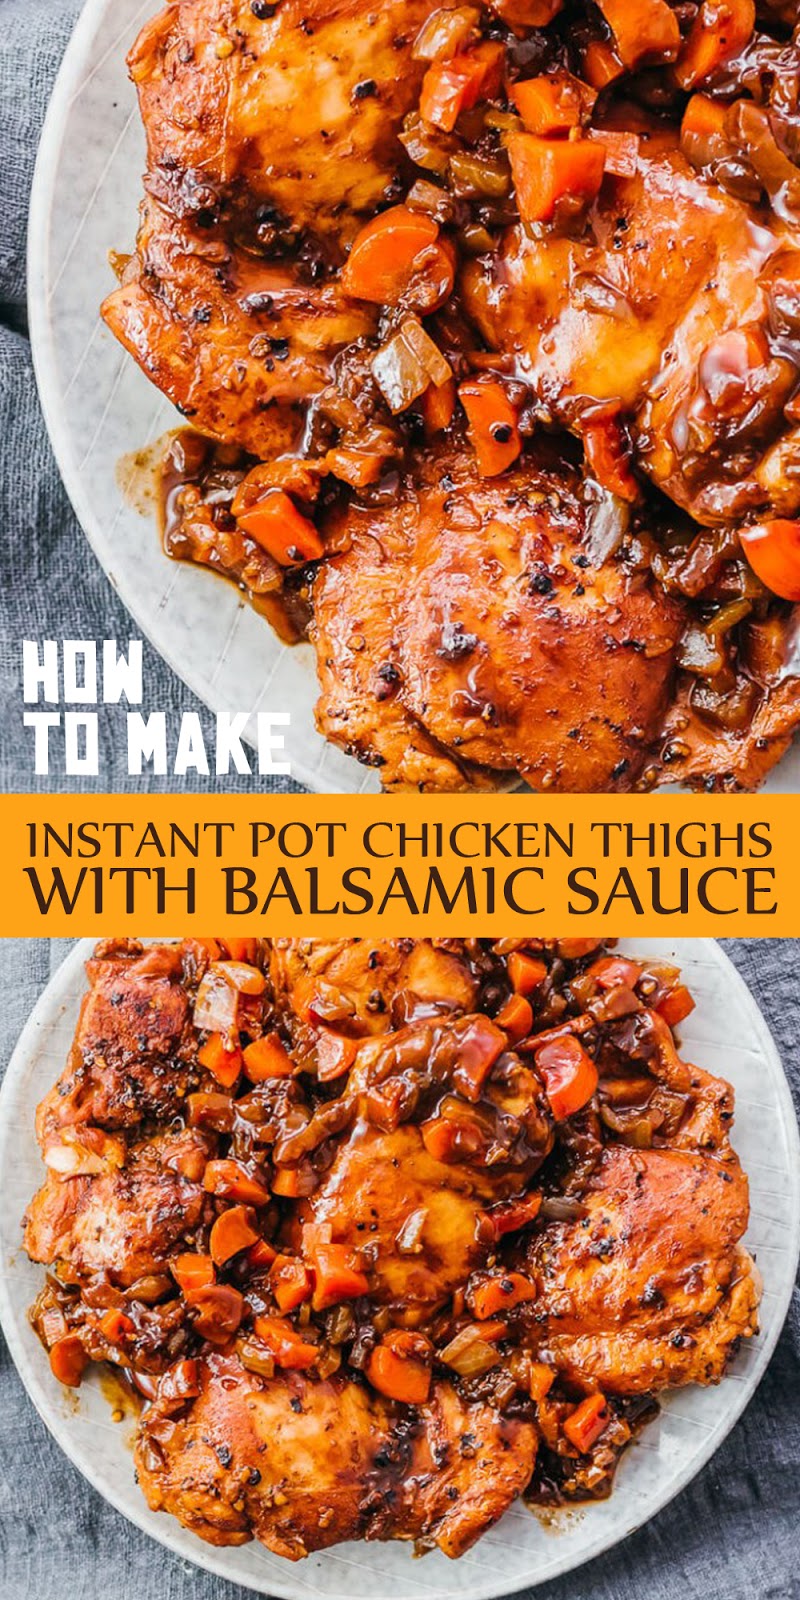 INSTANT POT CHICKEN THIGHS WITH BALSAMIC SAUCE